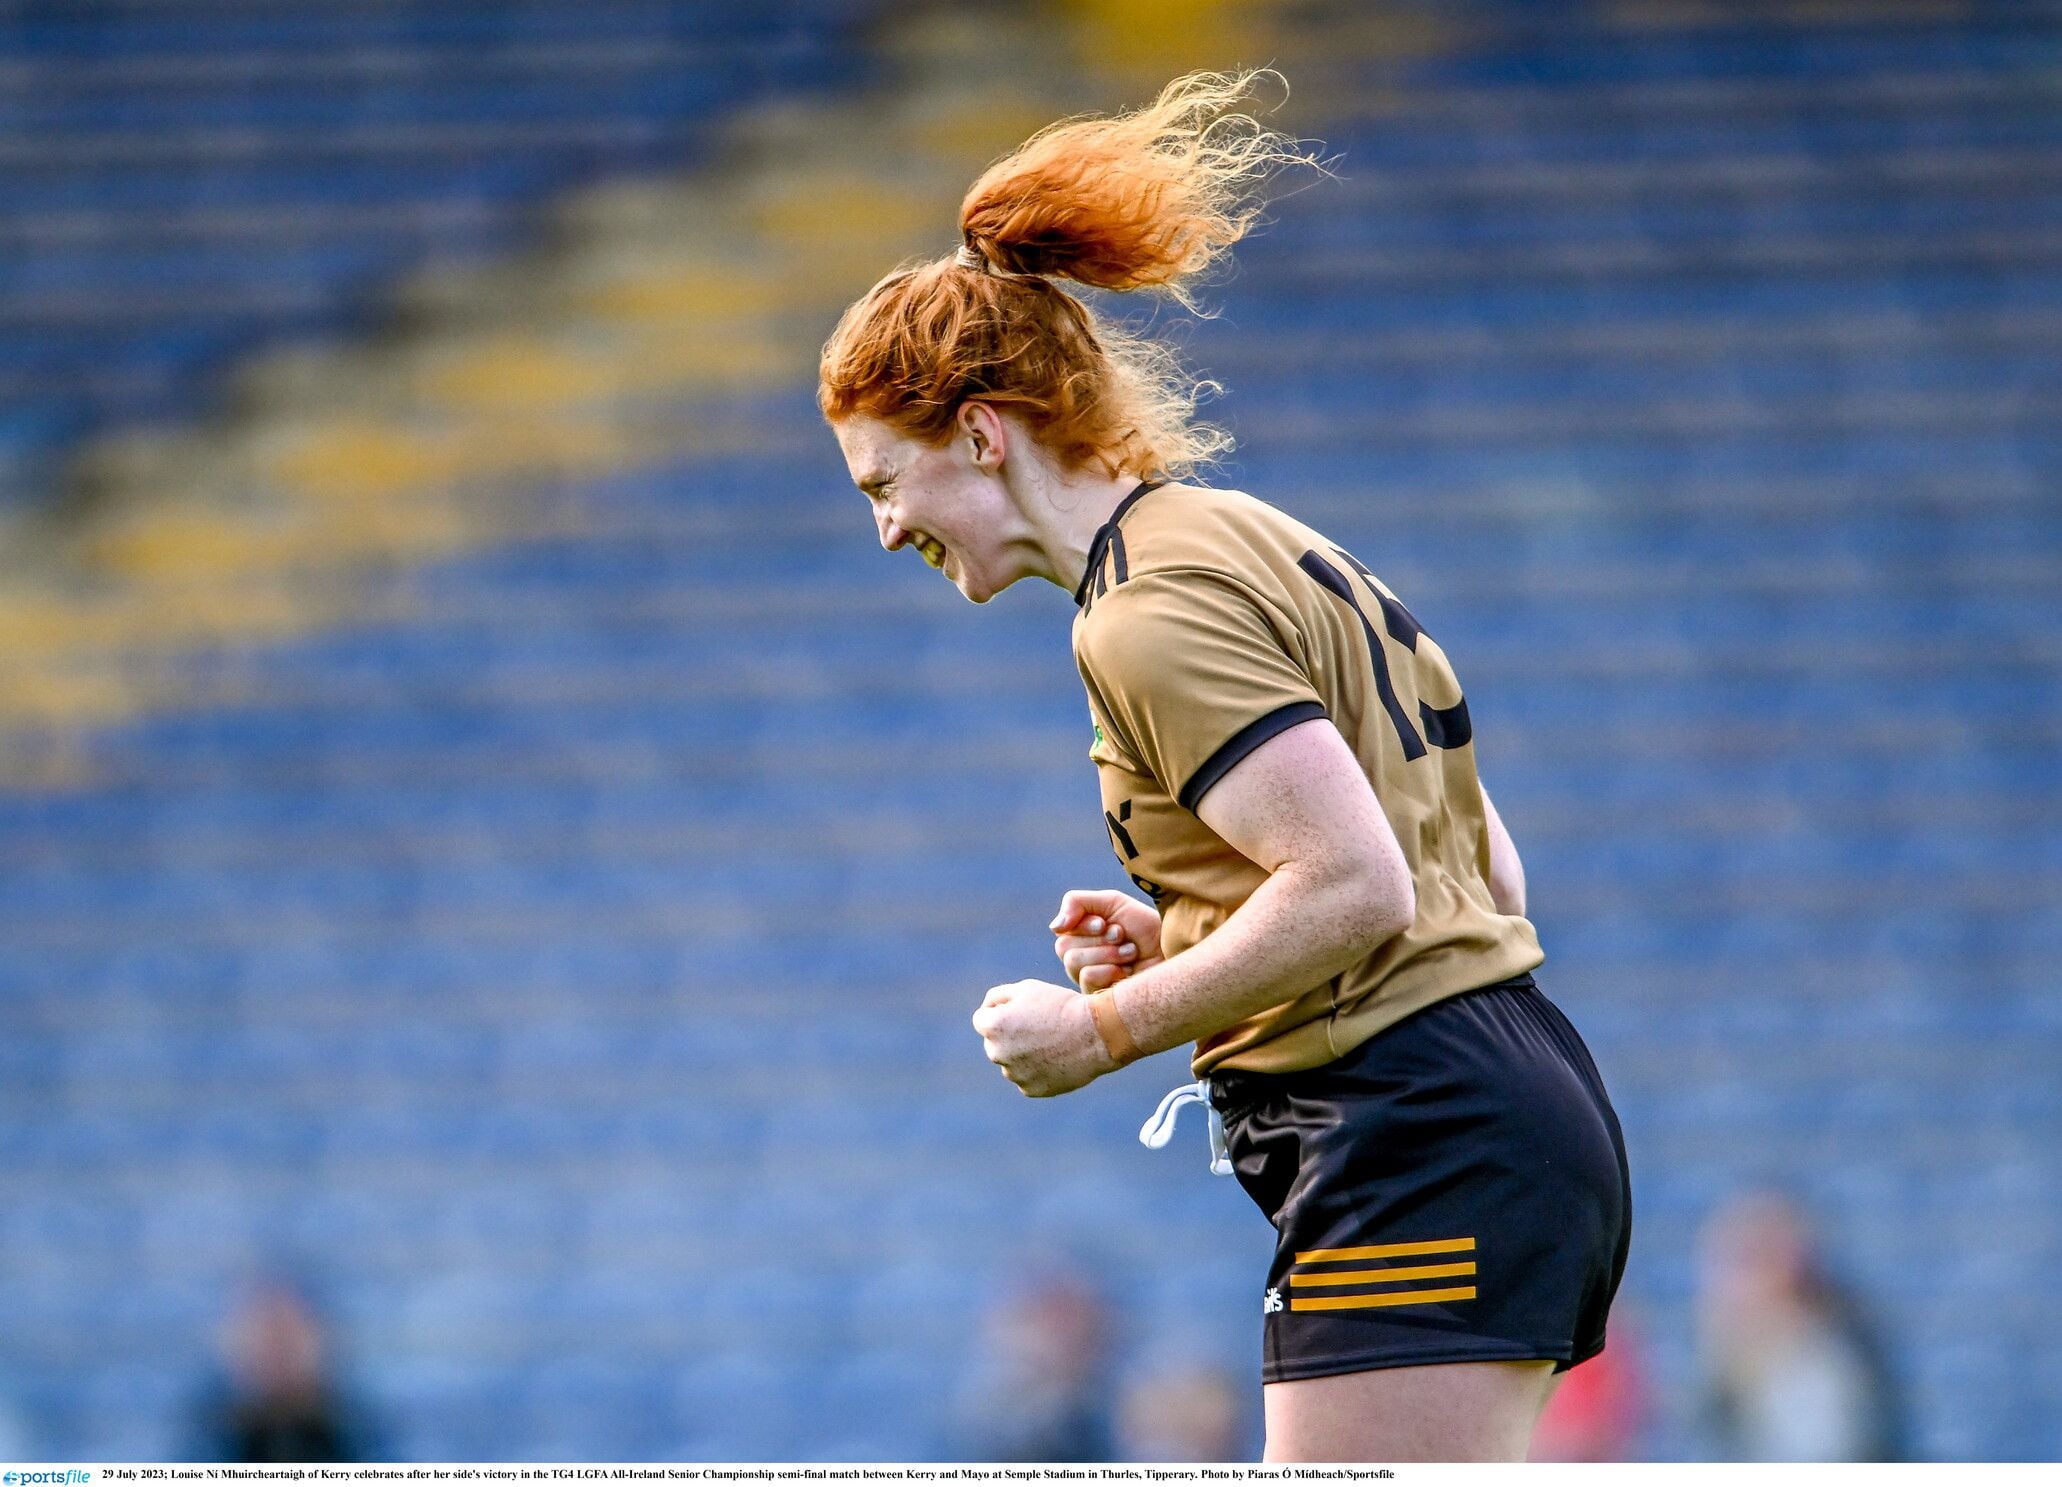 Long - No Croke Park distraction for Kerry Ladies ahead of league